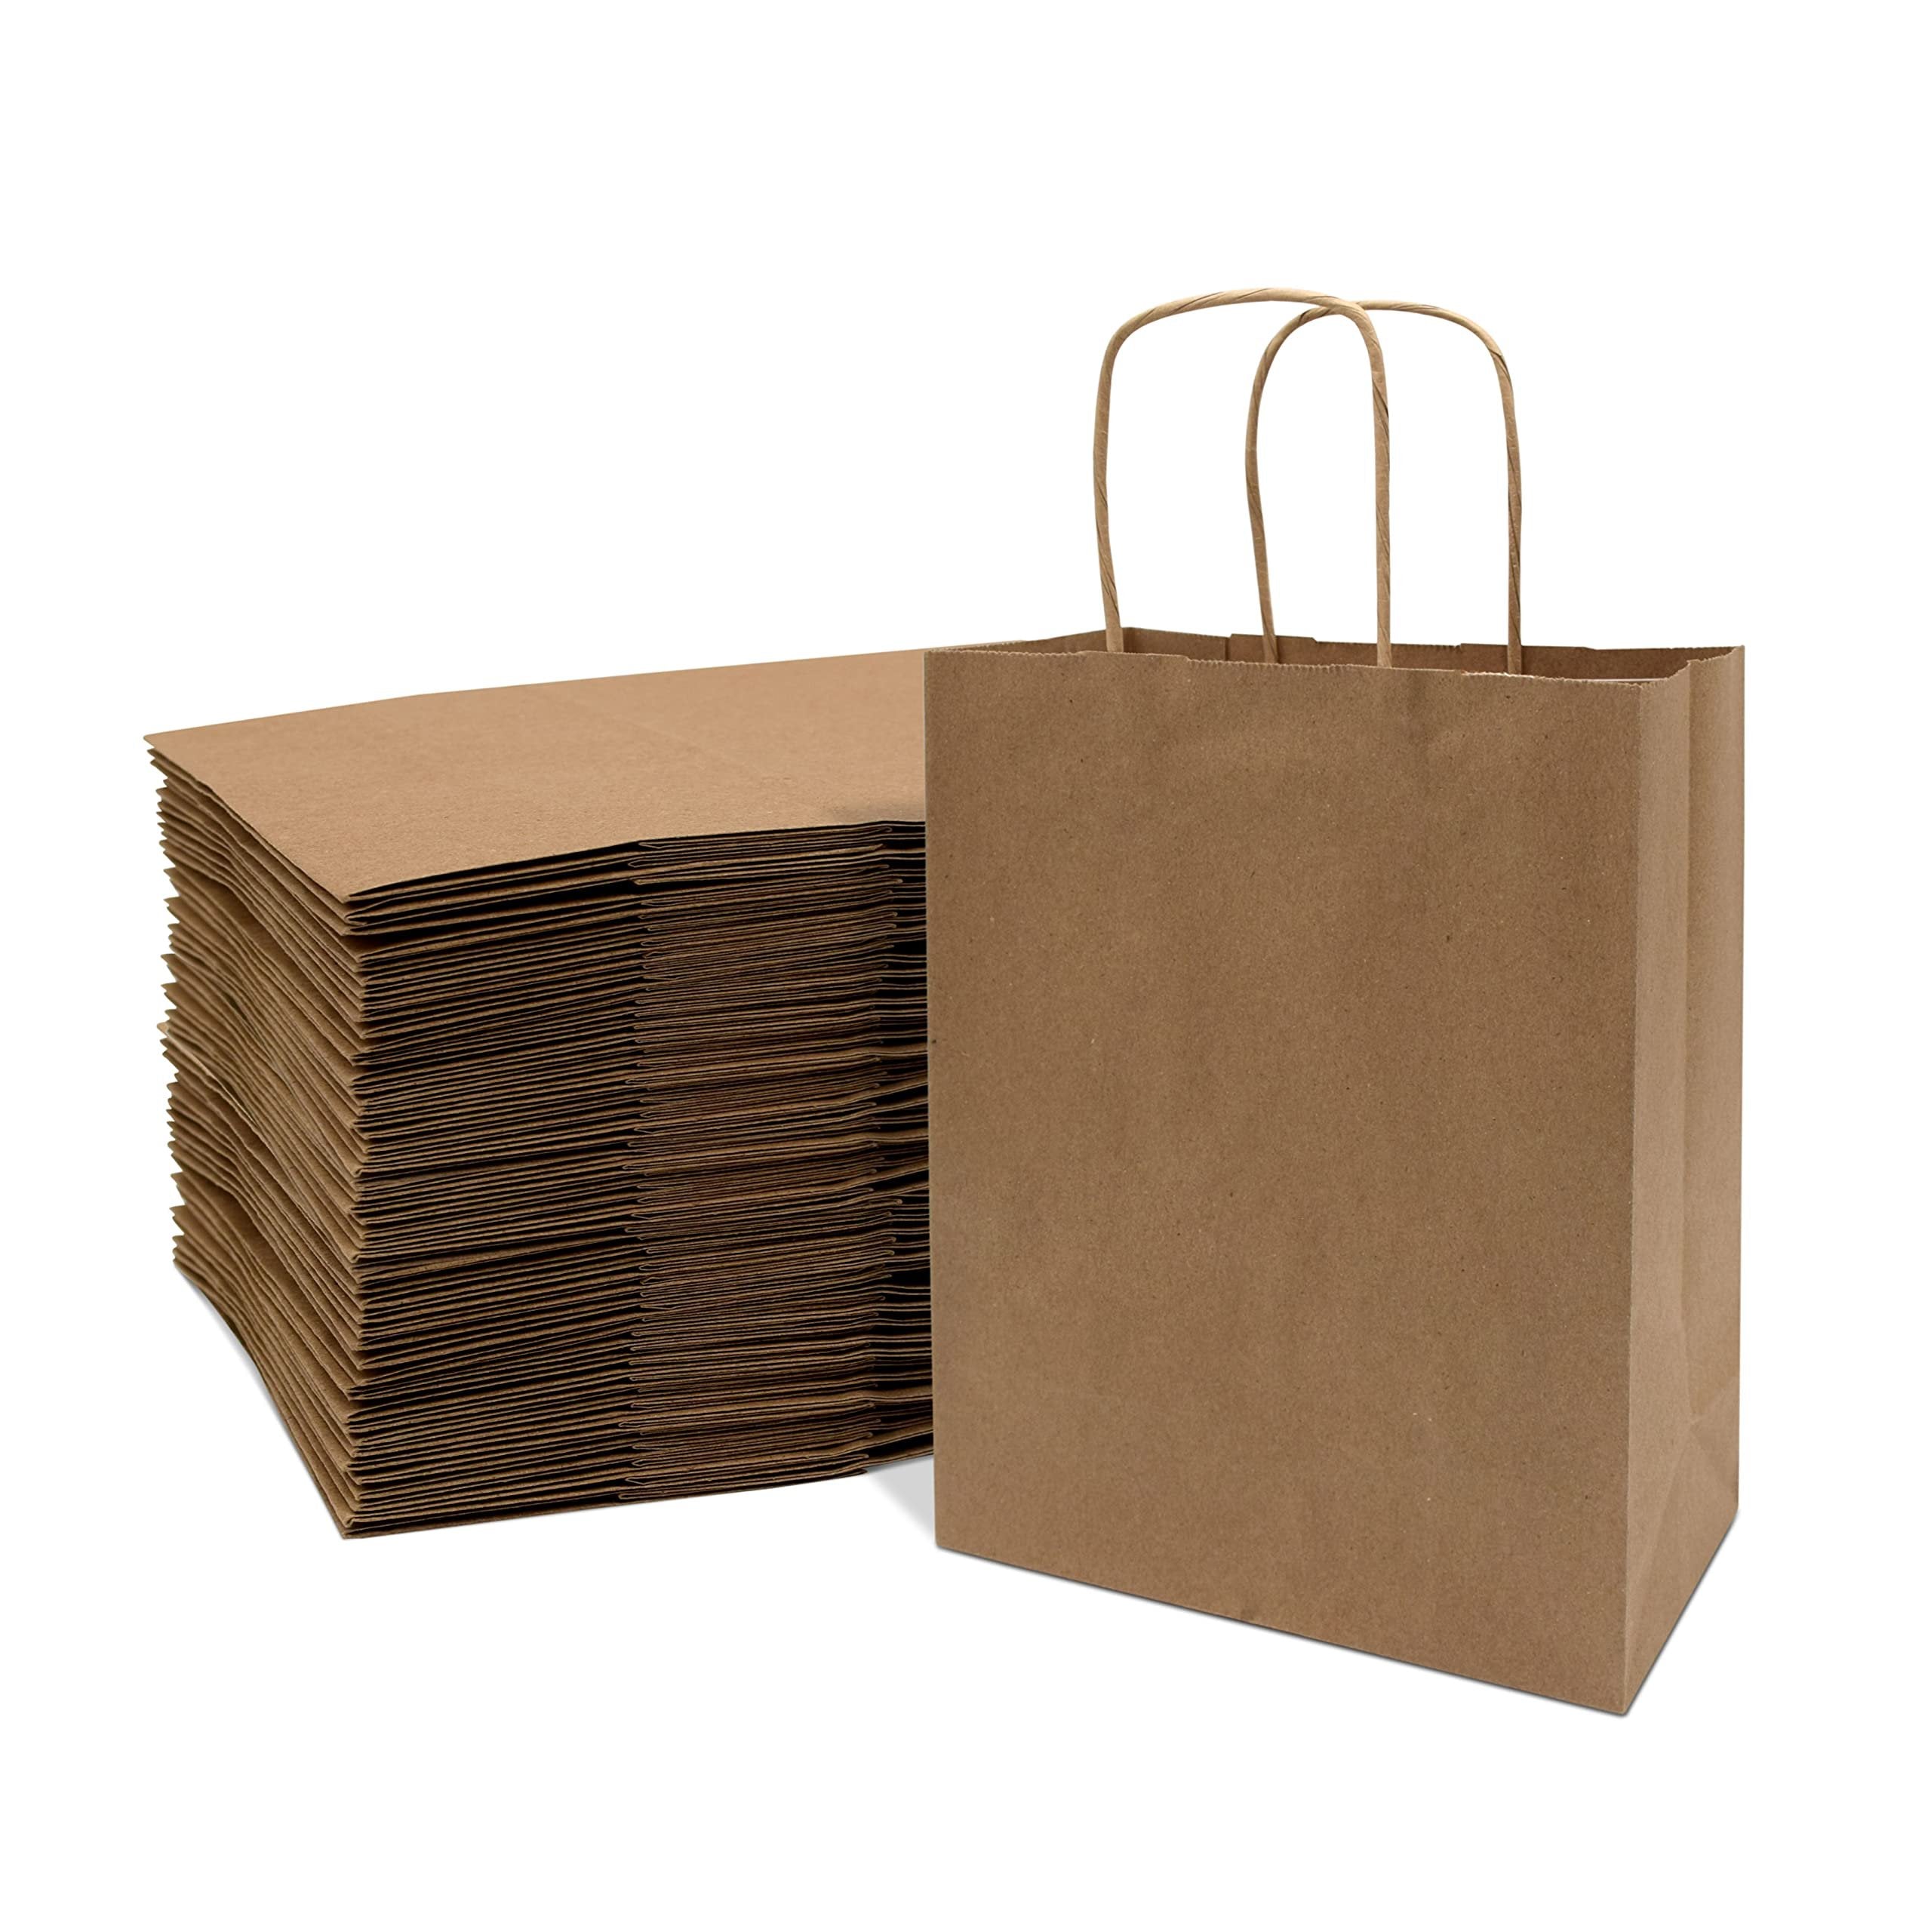 Prime Line Packaging Brown Kraft Paper Bags with Handles - 8x4x10 Inch (50 Count) for Boutiques, Retail Stores, Parties, and Gifts